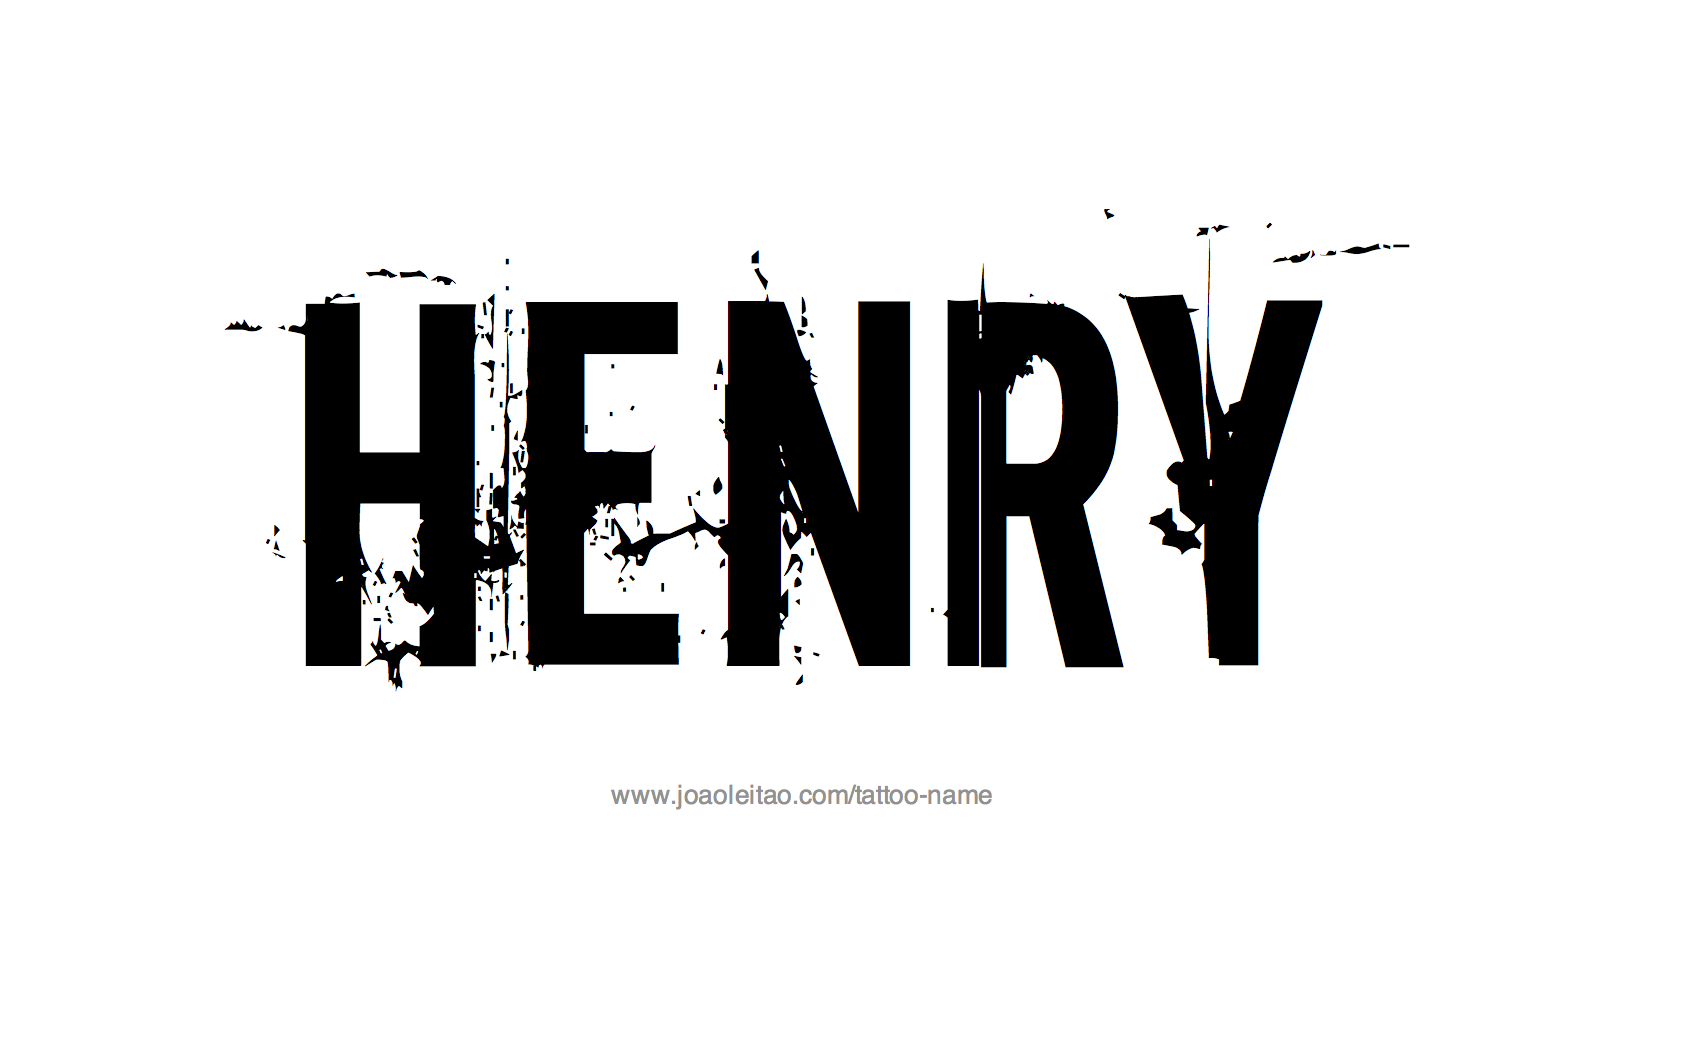 Henry Name Tattoo Designs